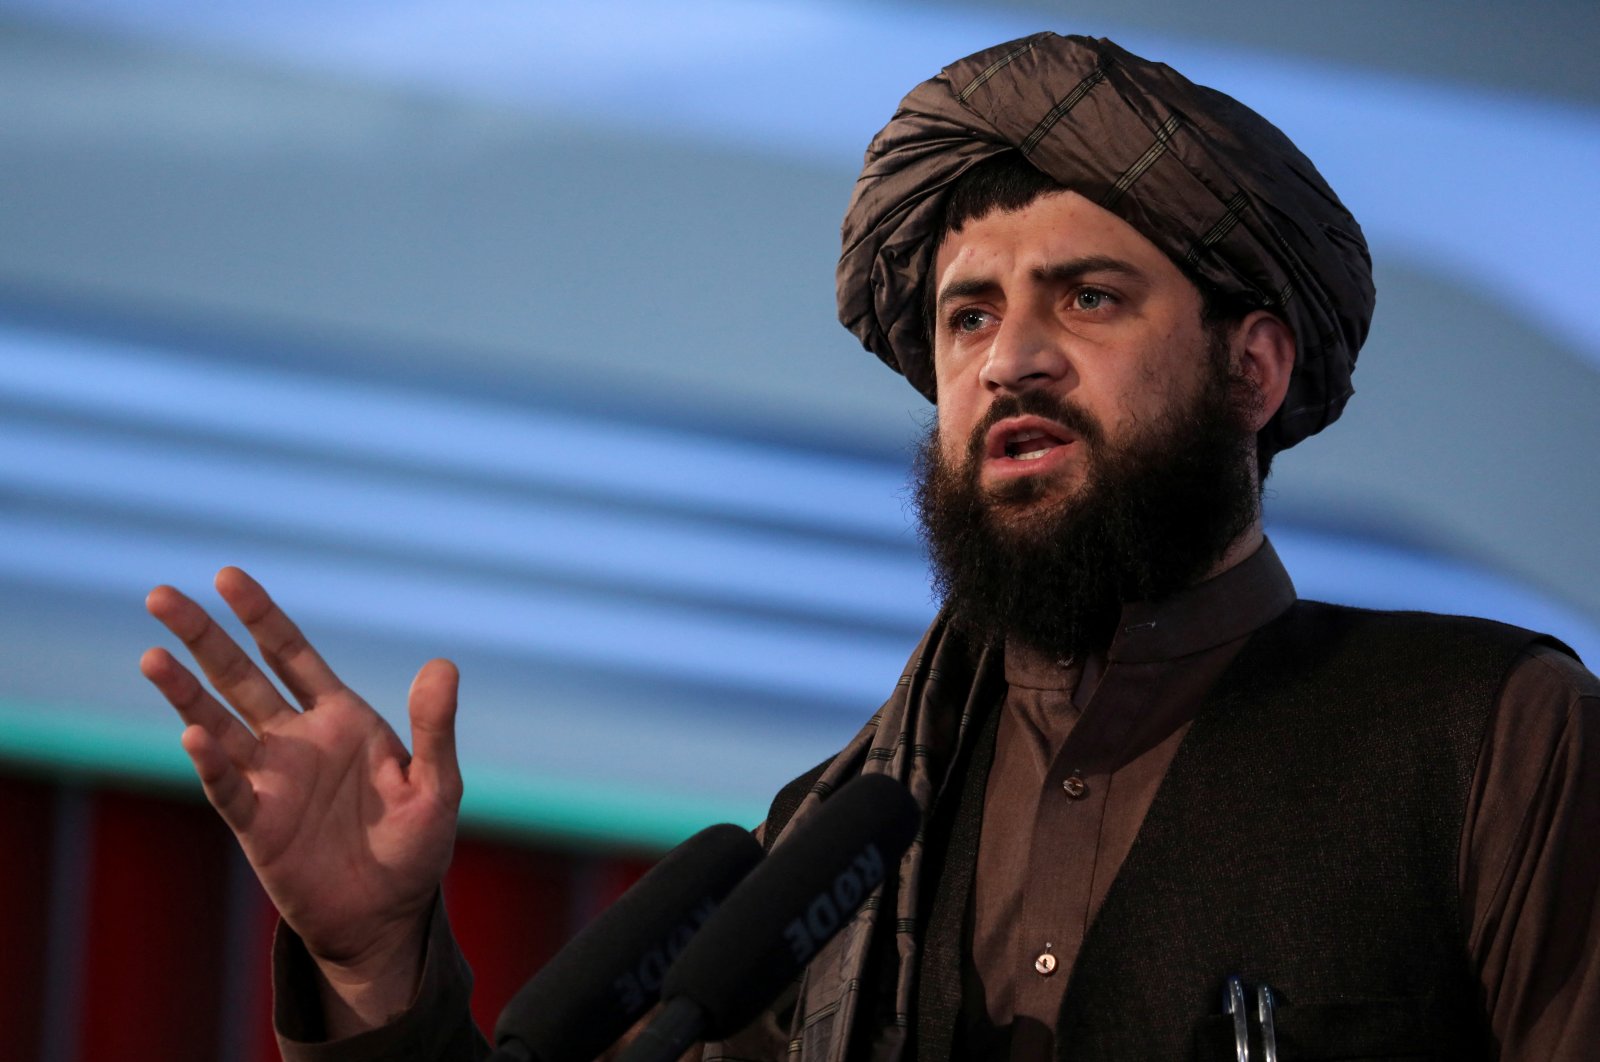 Taliban&#039;s acting Defense Minister Mullah Mohammad Yaqoob speaks during the death anniversary of Mullah Mohammad Omar, the late leader and founder of the Taliban, Kabul, Afghanistan, April 24, 2022. (Reuters Photo)